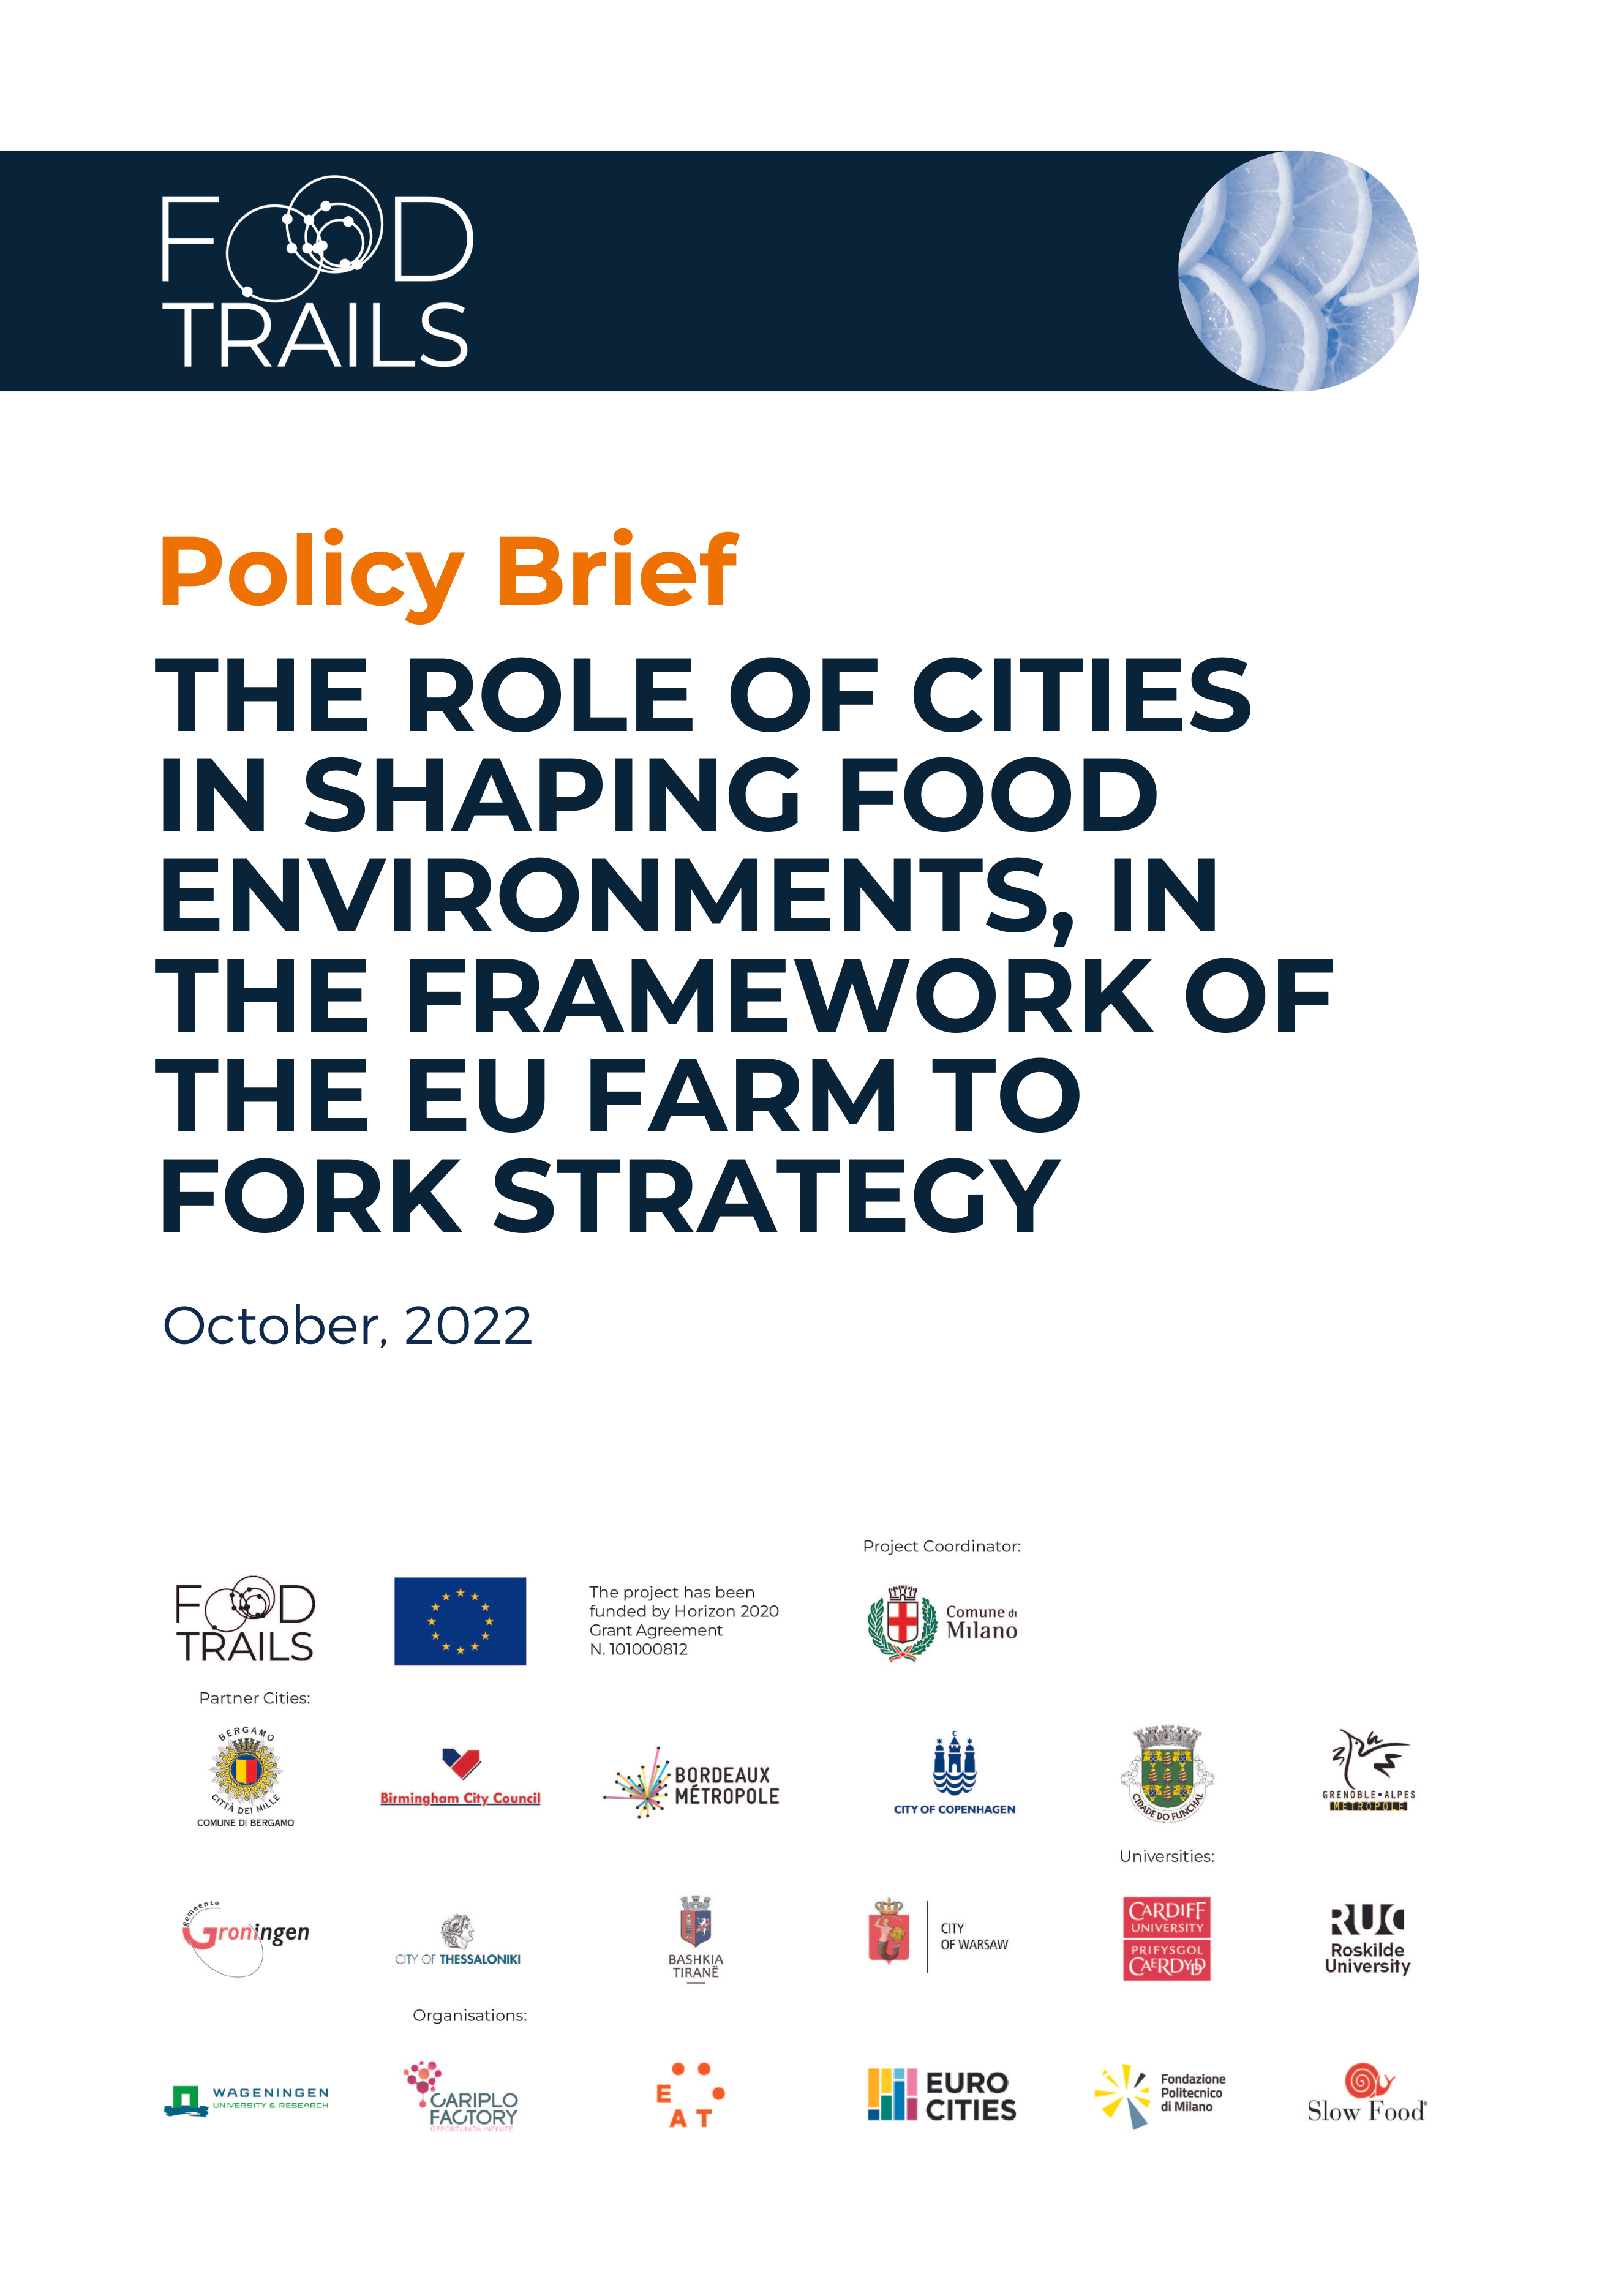 The role of cities in shaping food environments, in the framework of the EU Farm to Fork Strategy